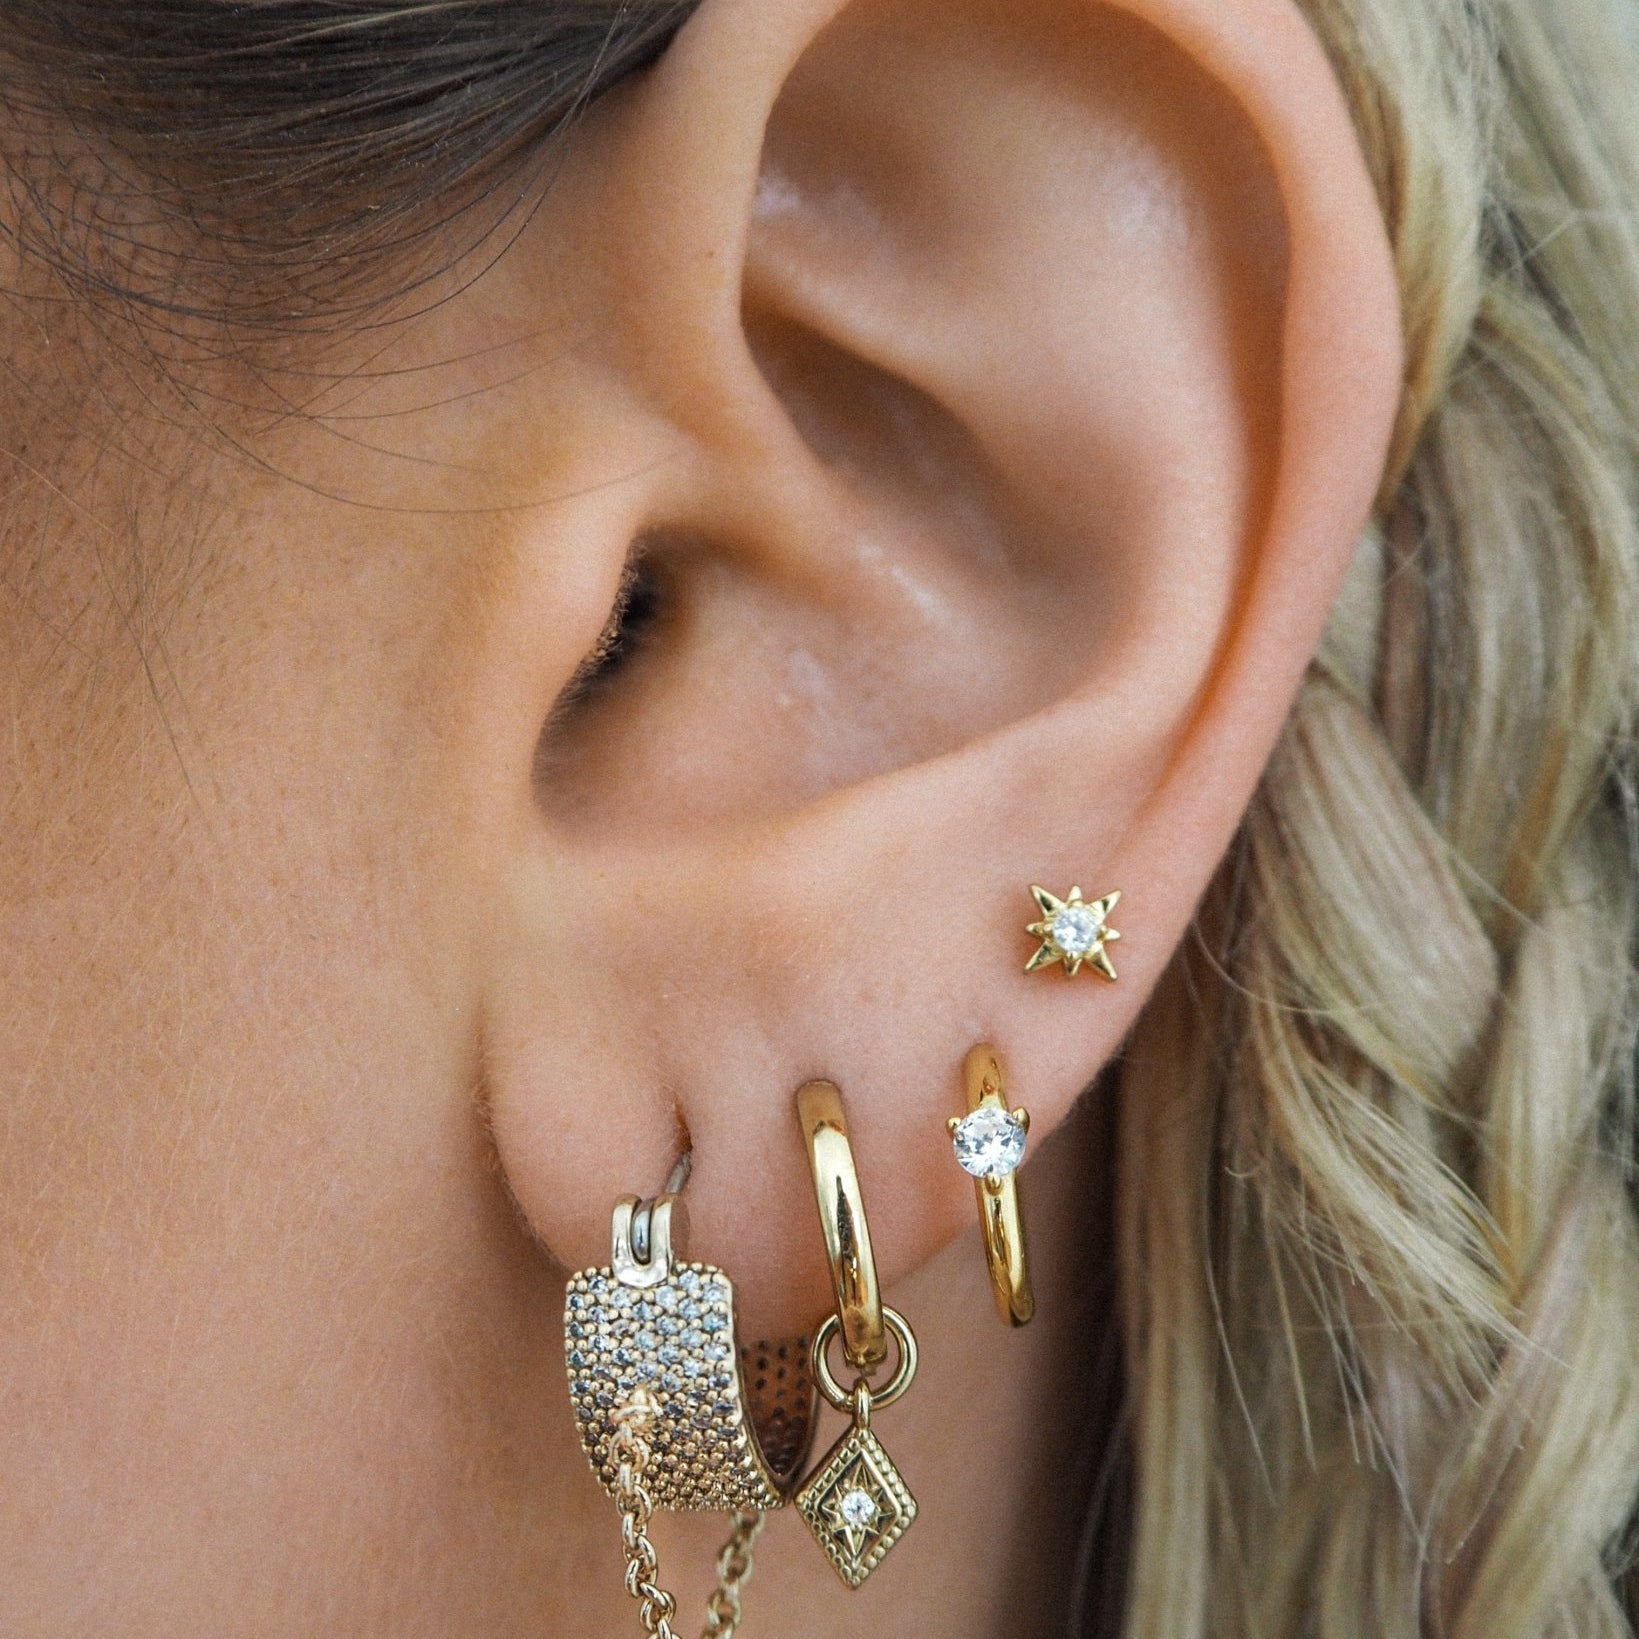 Monroe earrings - five and two jewelry